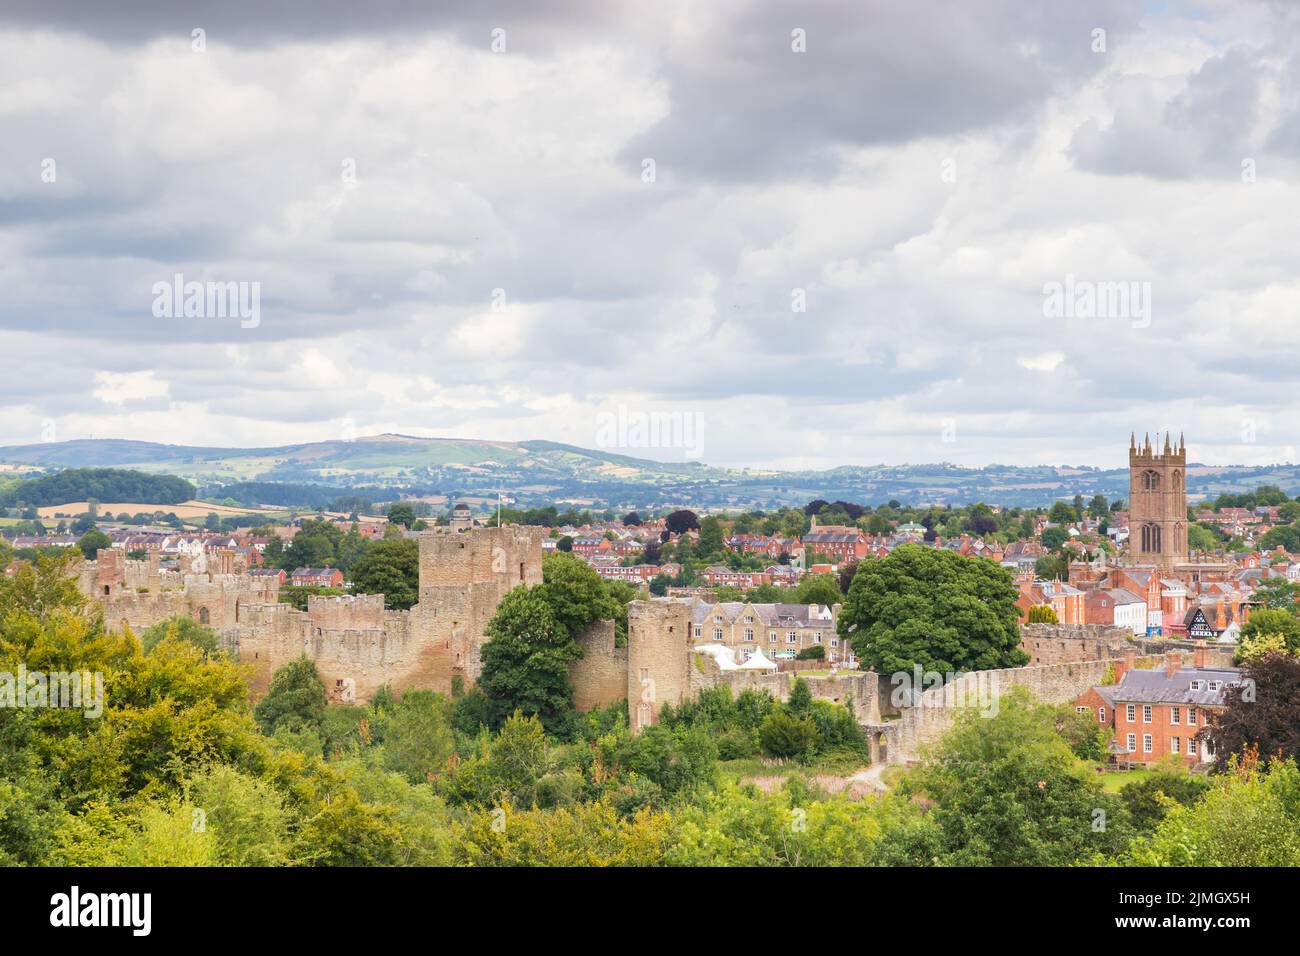 A view of the market town of Ludlow in Shropshire UK, showing the castle and St Lawrence's Church Stock Photo